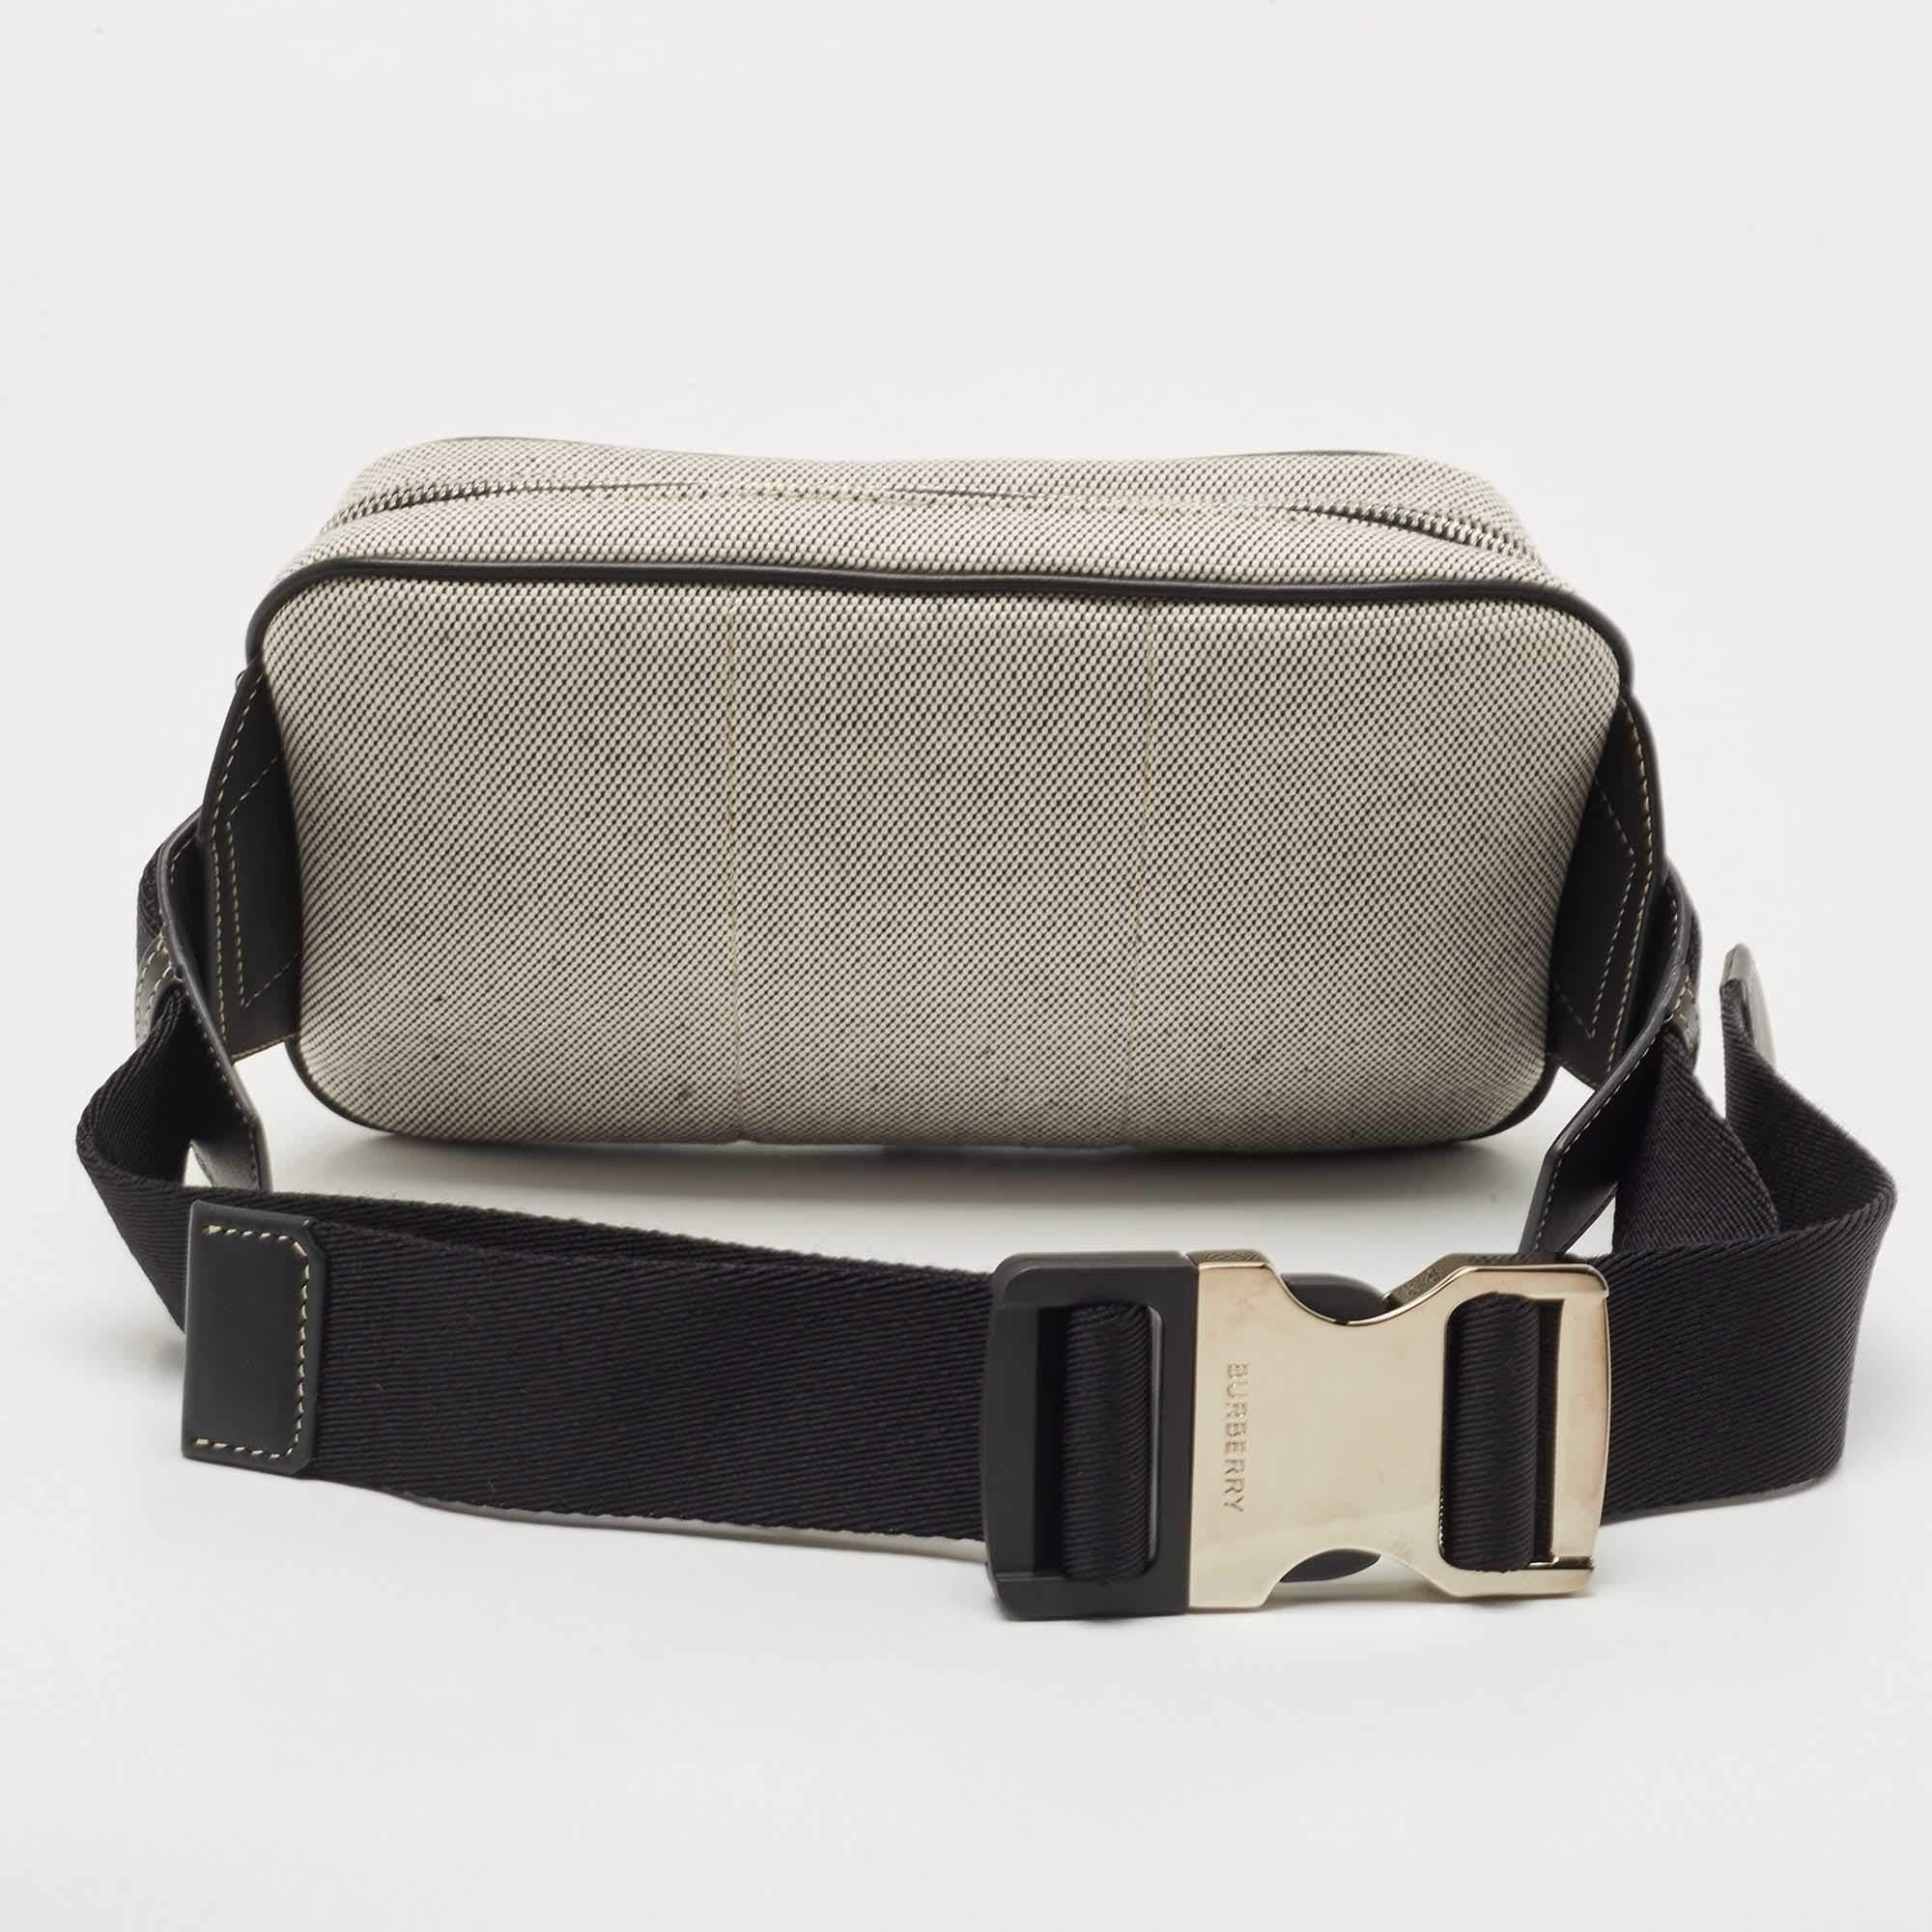 This bum bag from Burberry brings a practical and modish take to your attire. It is tailored using black nylon and leather with a contrast logo print decorating the front. This bum bag is equipped with zipped pockets that lead to the canvas-lined